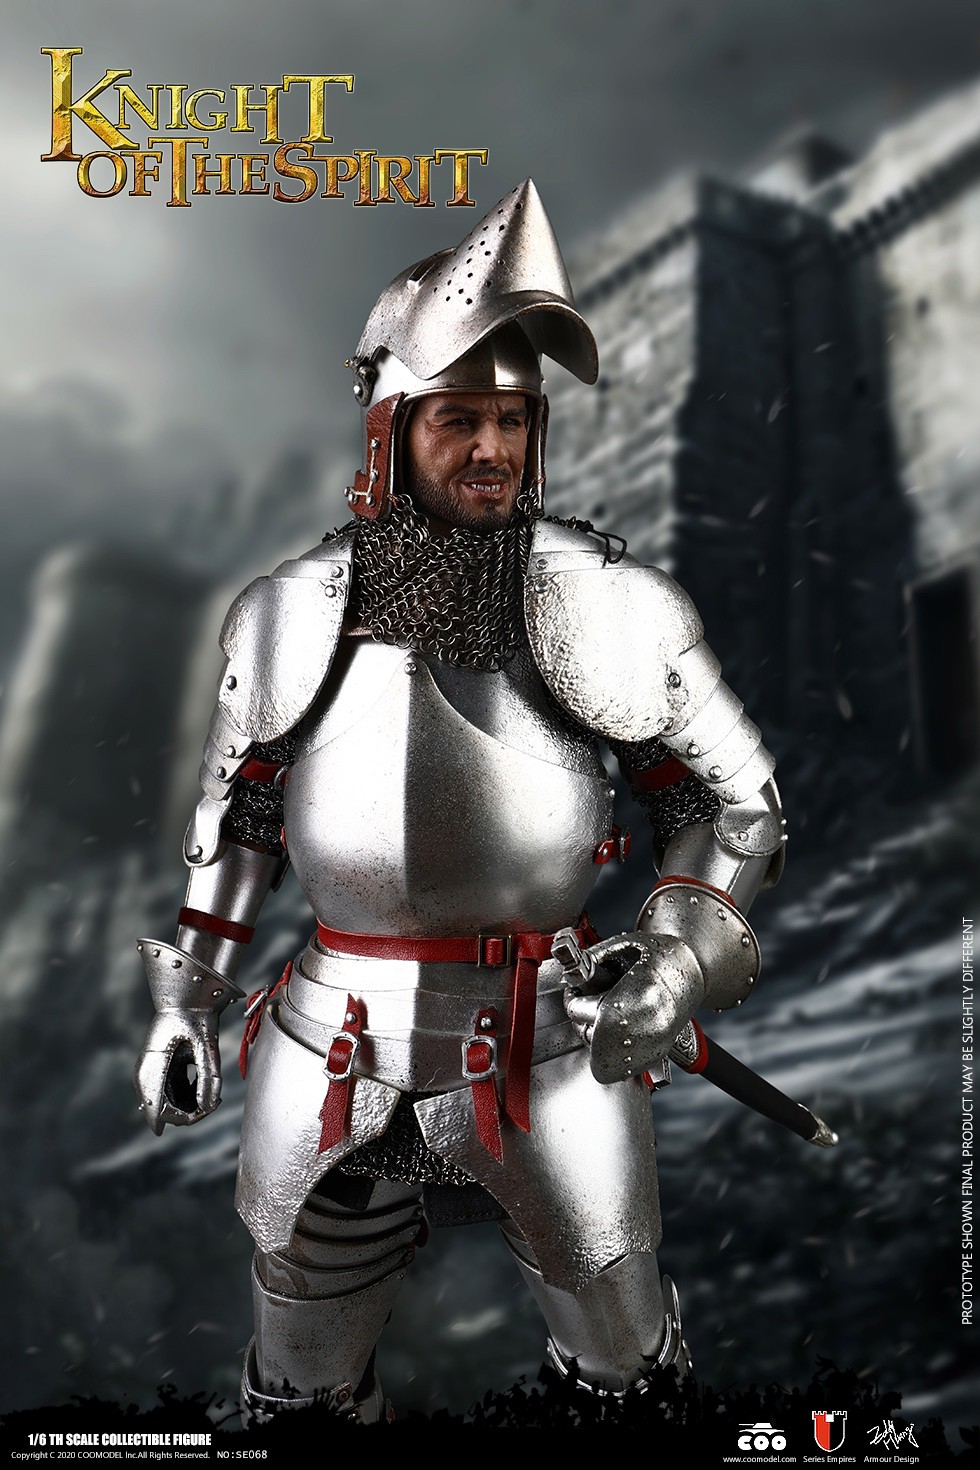 HolySpiritKnight - NEW PRODUCT: COOMODEL: 1/6 Empire Series (Alloy Die Casting)-Knight of Bachelor, Knight of the Spirit, Saint Michel Knight Set, Armoured Sergeants Set 22261511